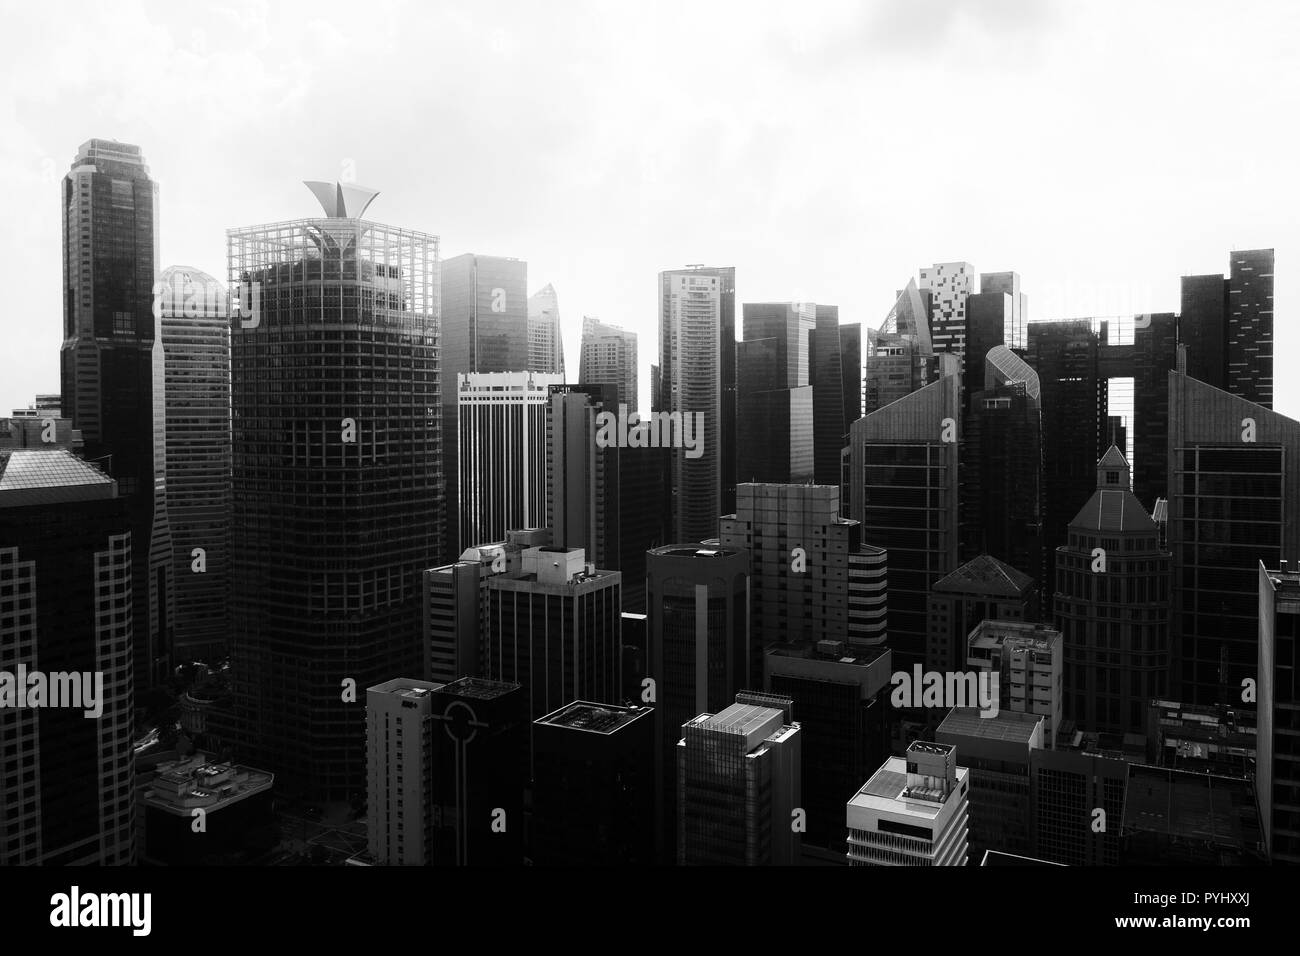 Black and white commercial building view of Singapore Central Business District. Stock Photo